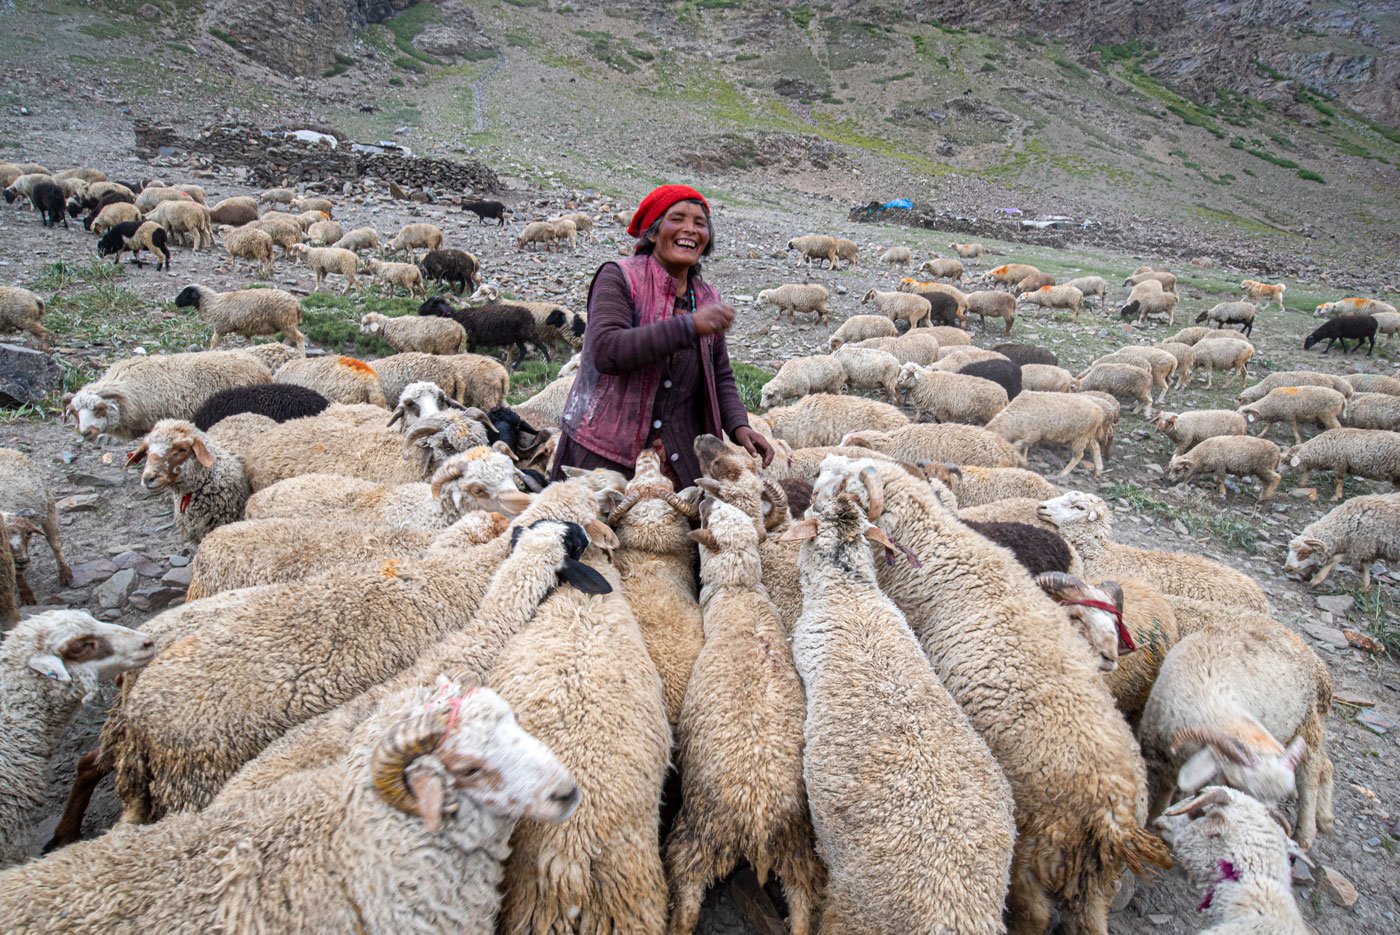 Tashi Dolma surrounded by a flock of sheep which belong to her family